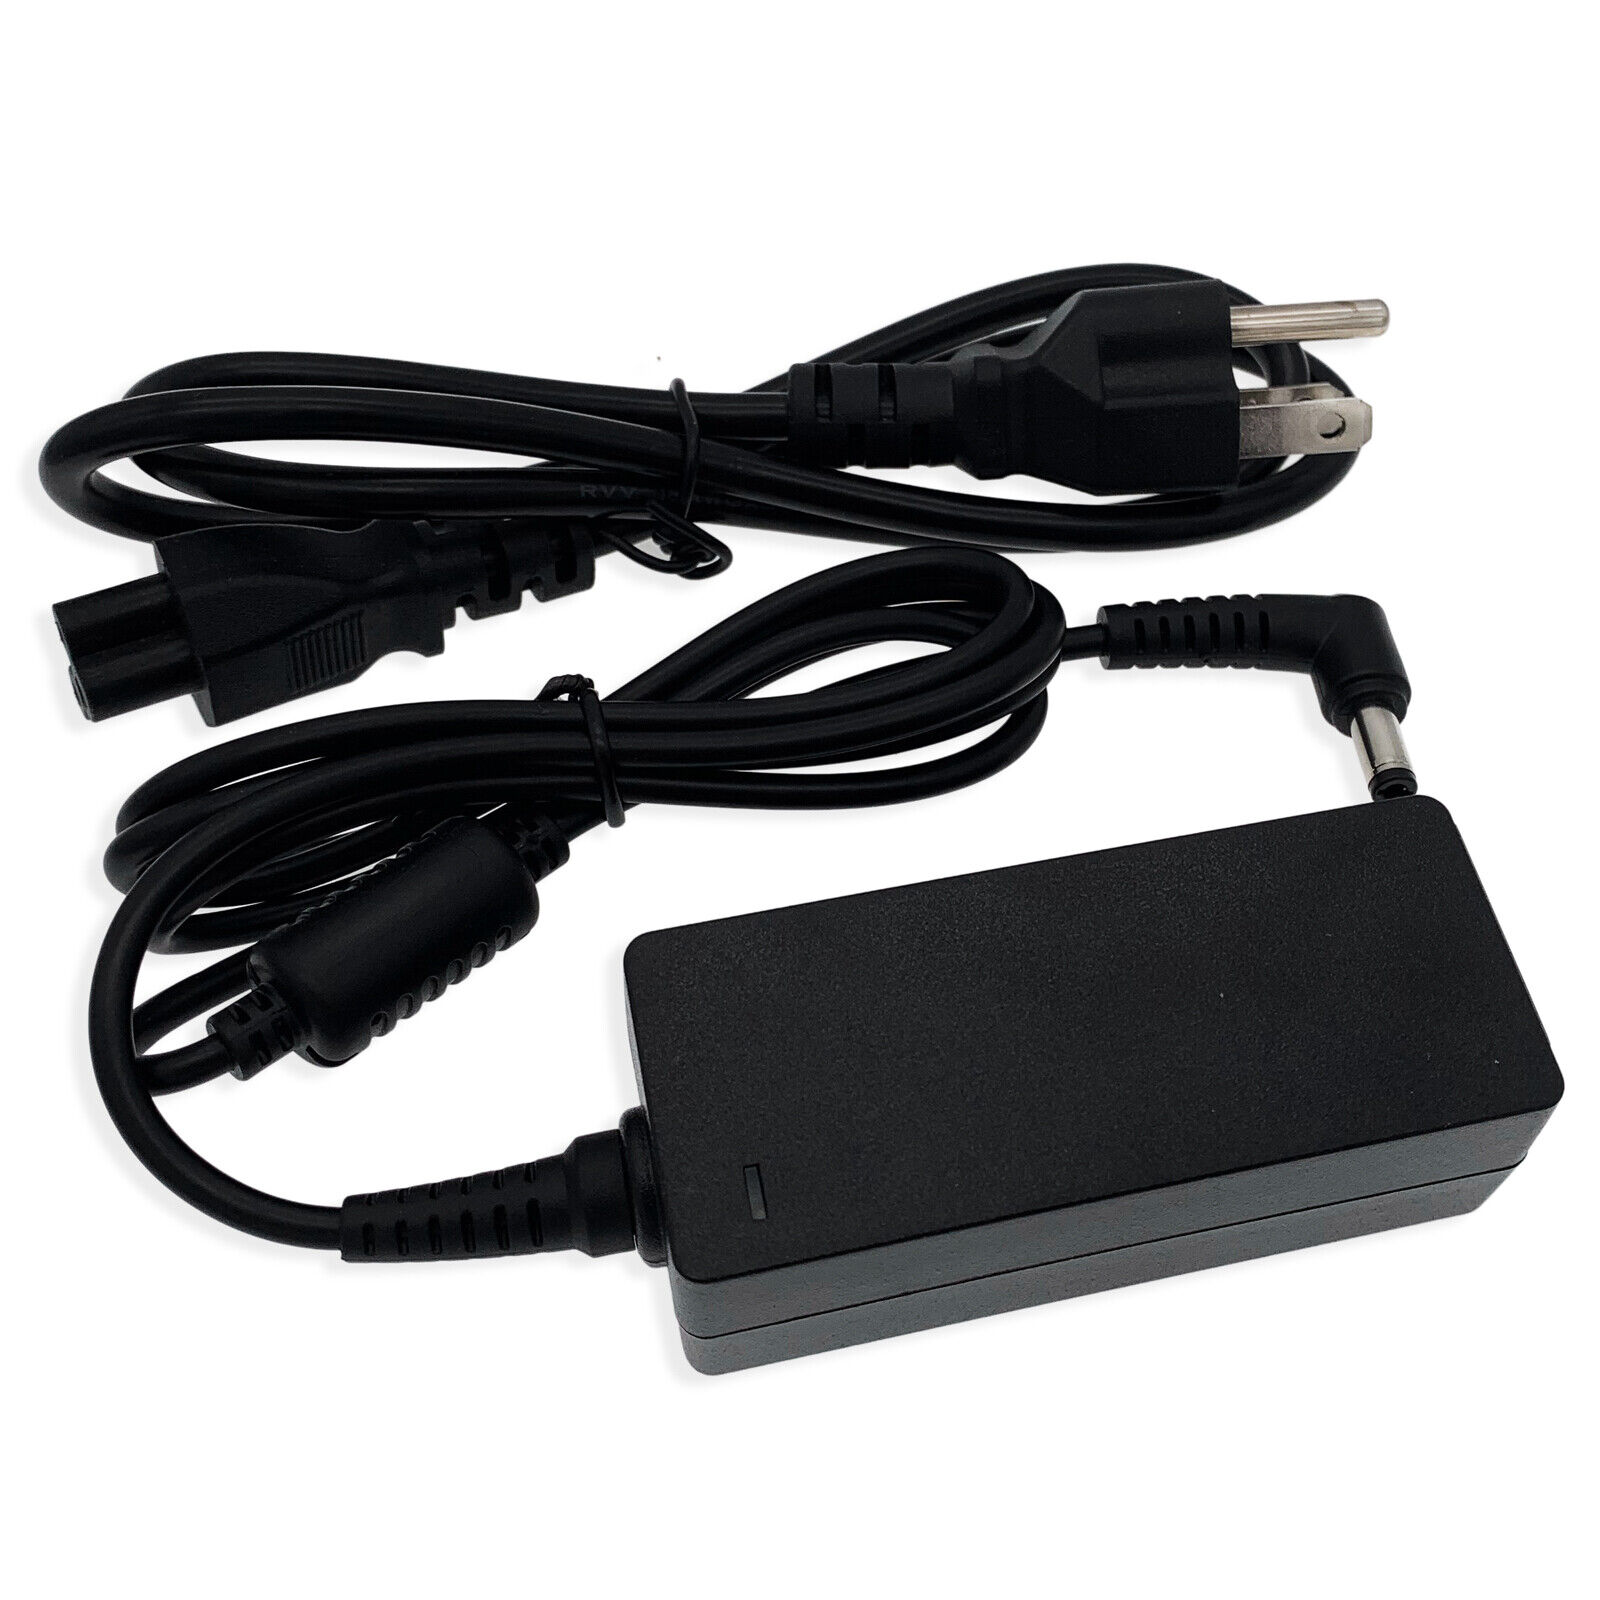 150W 19V AC Adapter Charger For New 2014 Razer Blade RZ09-0116 Gaming Laptop Brand Unbranded/Generic Bundled Items Powe